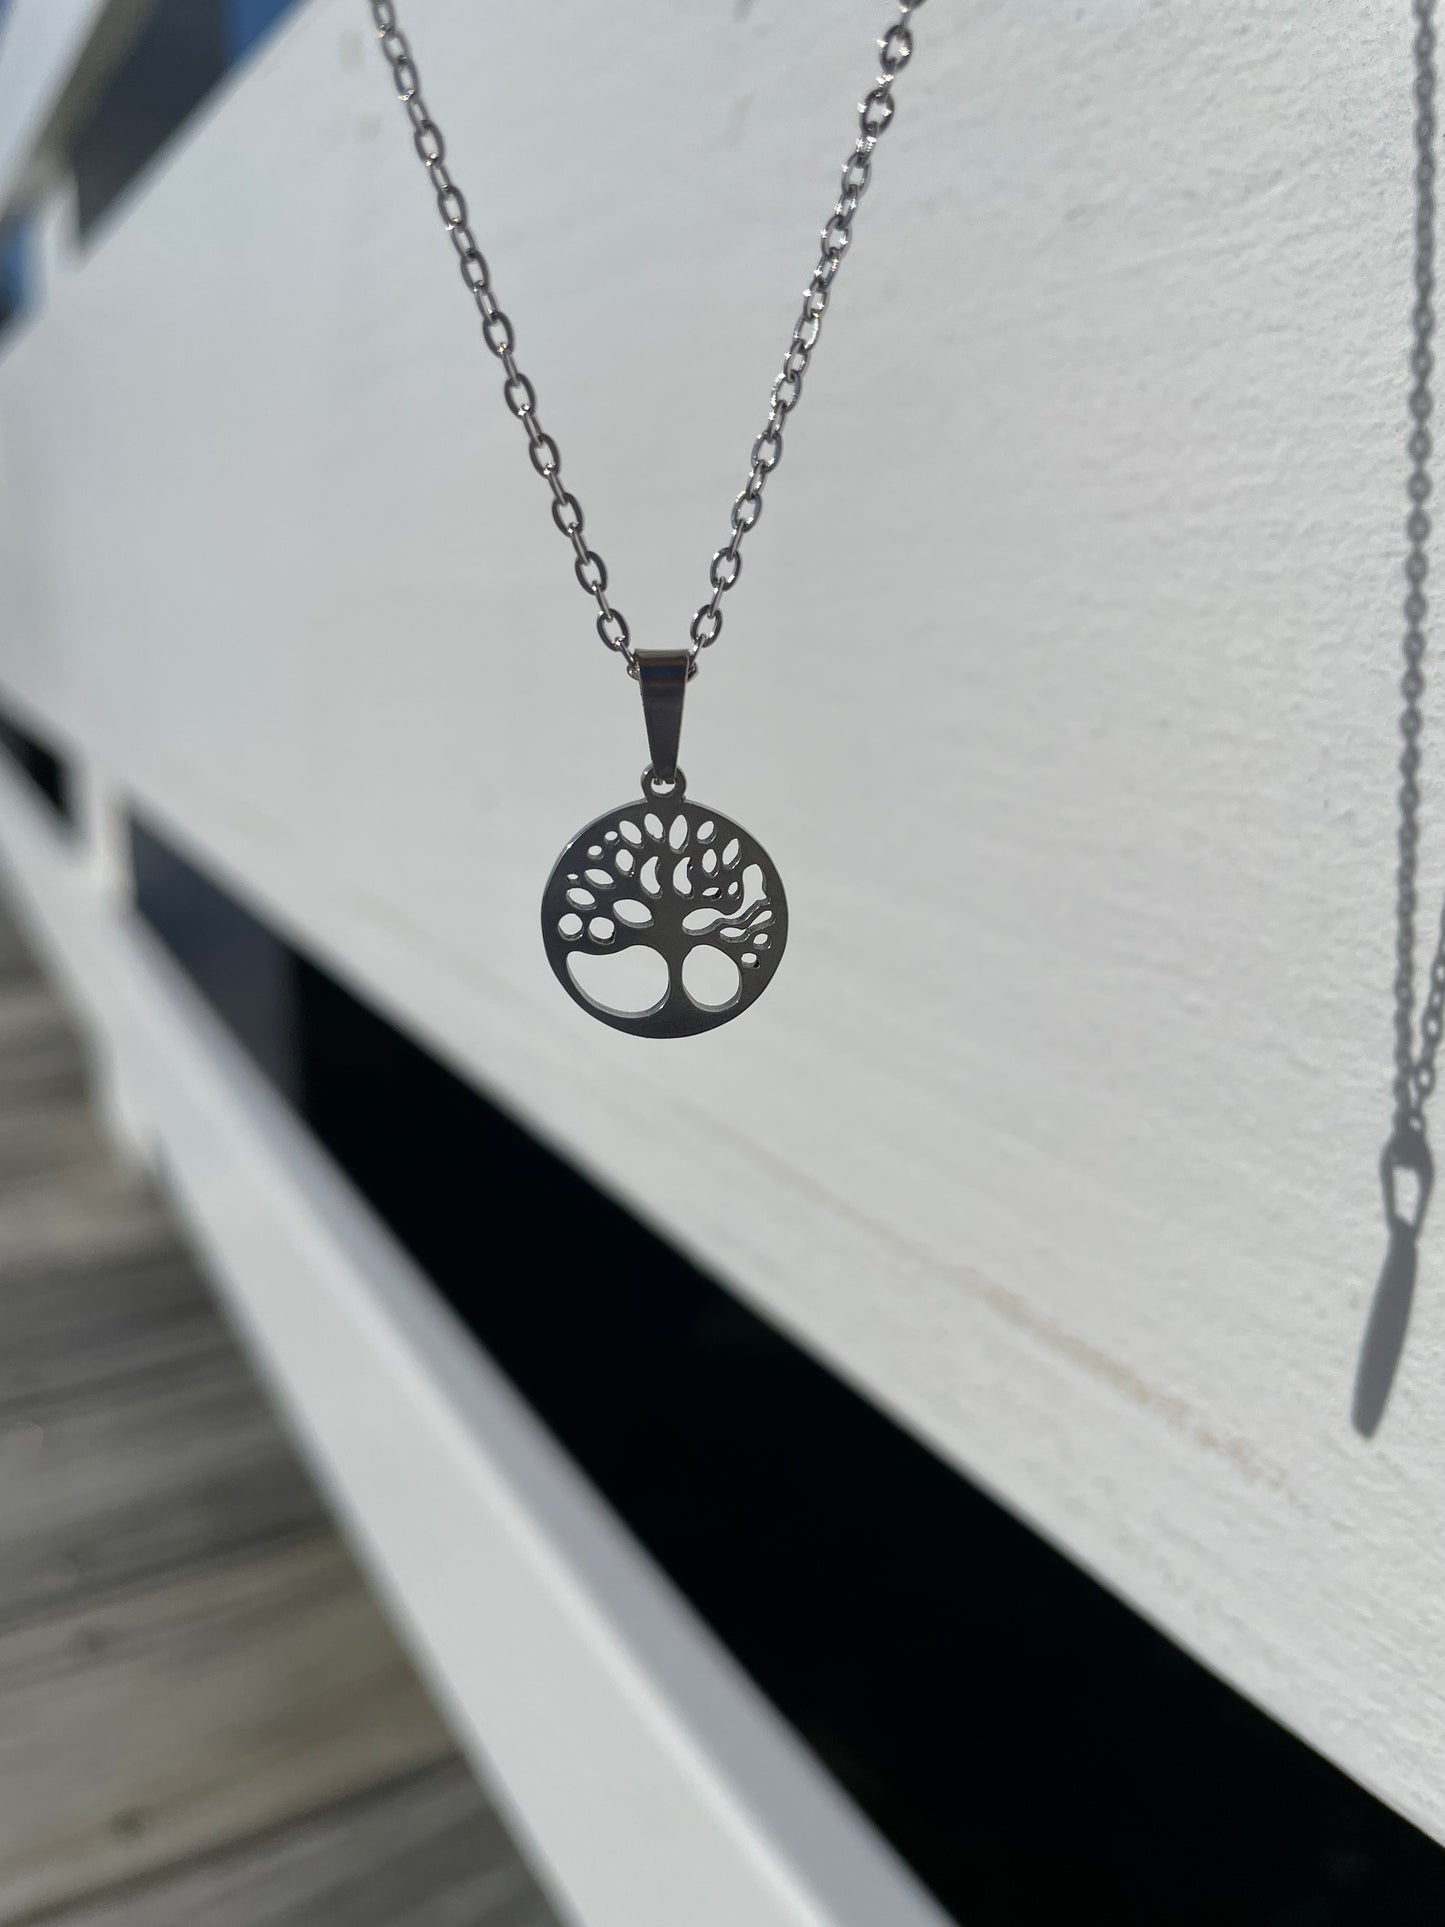 Tree of life necklace hanging